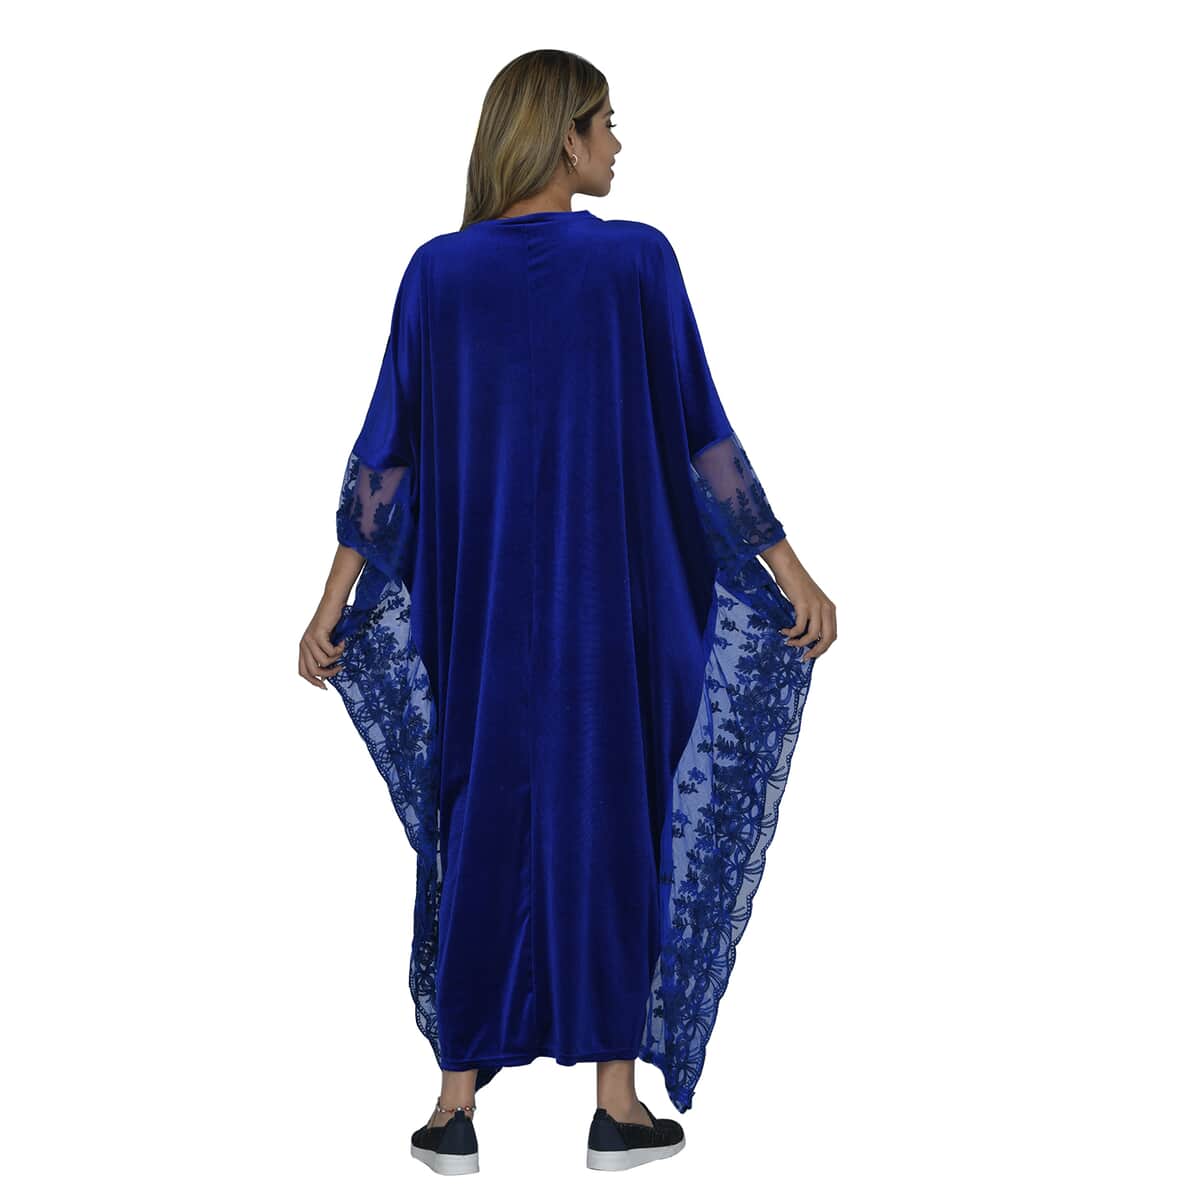 Tamsy Black Label - Lux Stretch Velvet Kaftan with Lace in Royal Blue - One Size Fits Most image number 1